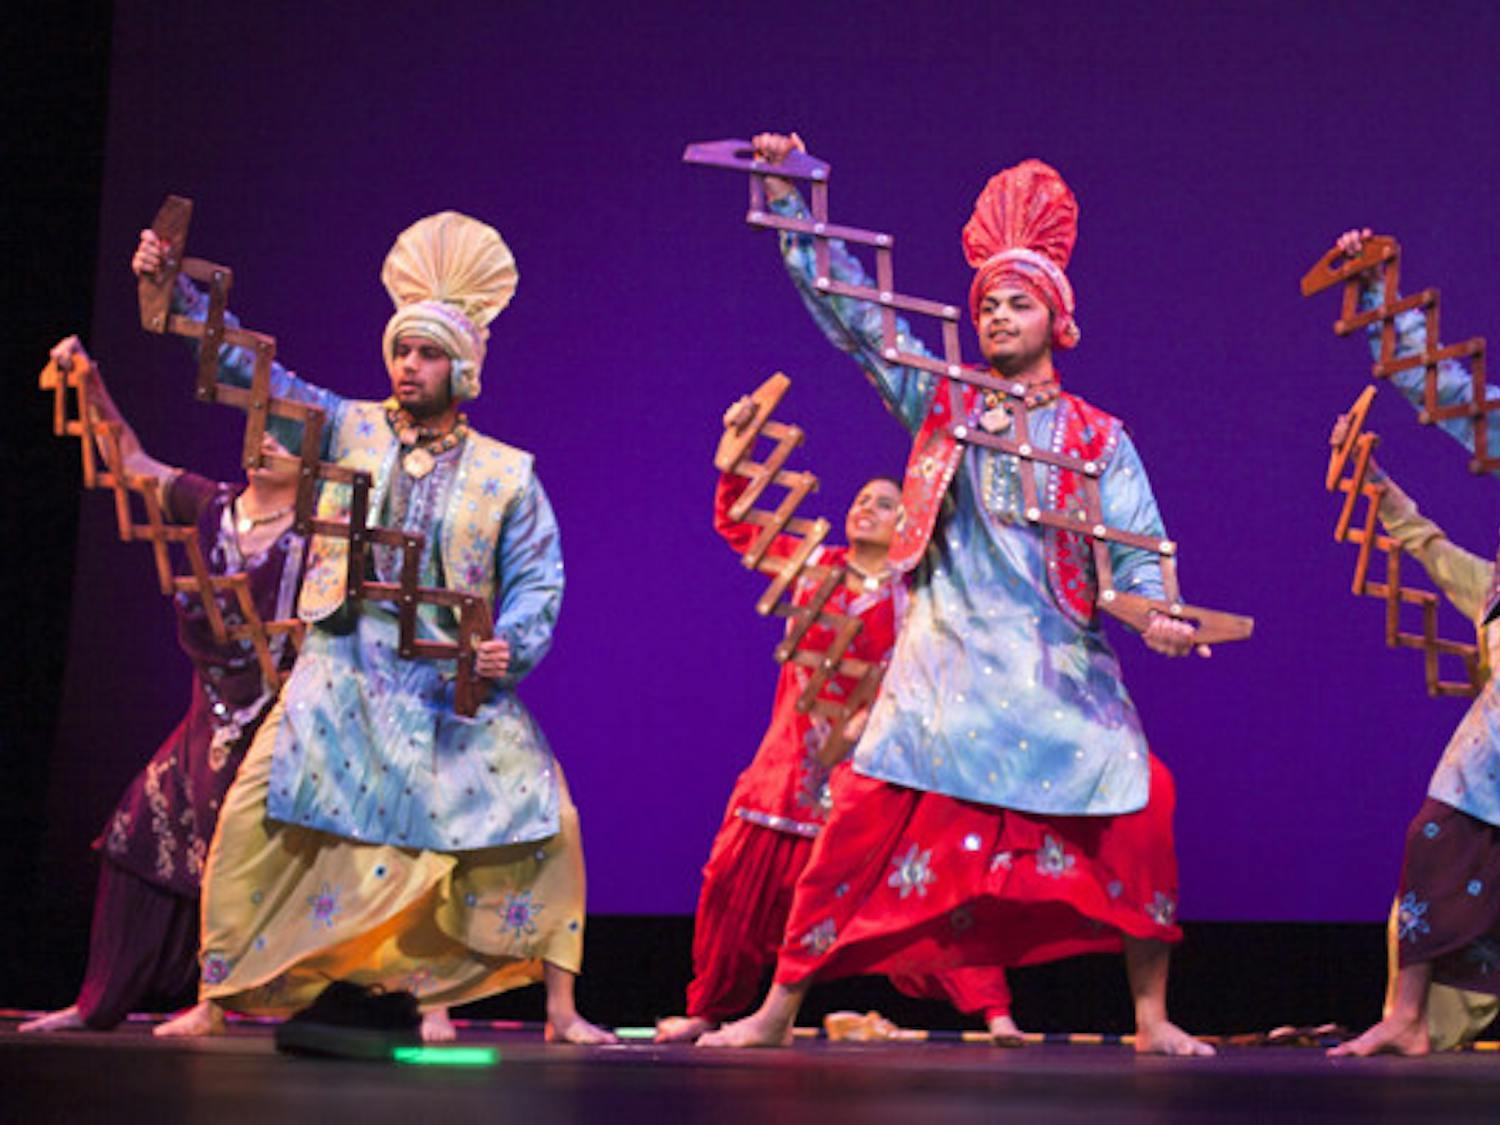 Members of Punjab Di Asli Pehchaan perform at the Indian Student Association's Diwali Show on Saturday night at the Curtis M. Phillips Center for the Performing Arts. The group is a competitive team of dancers from around Florida.